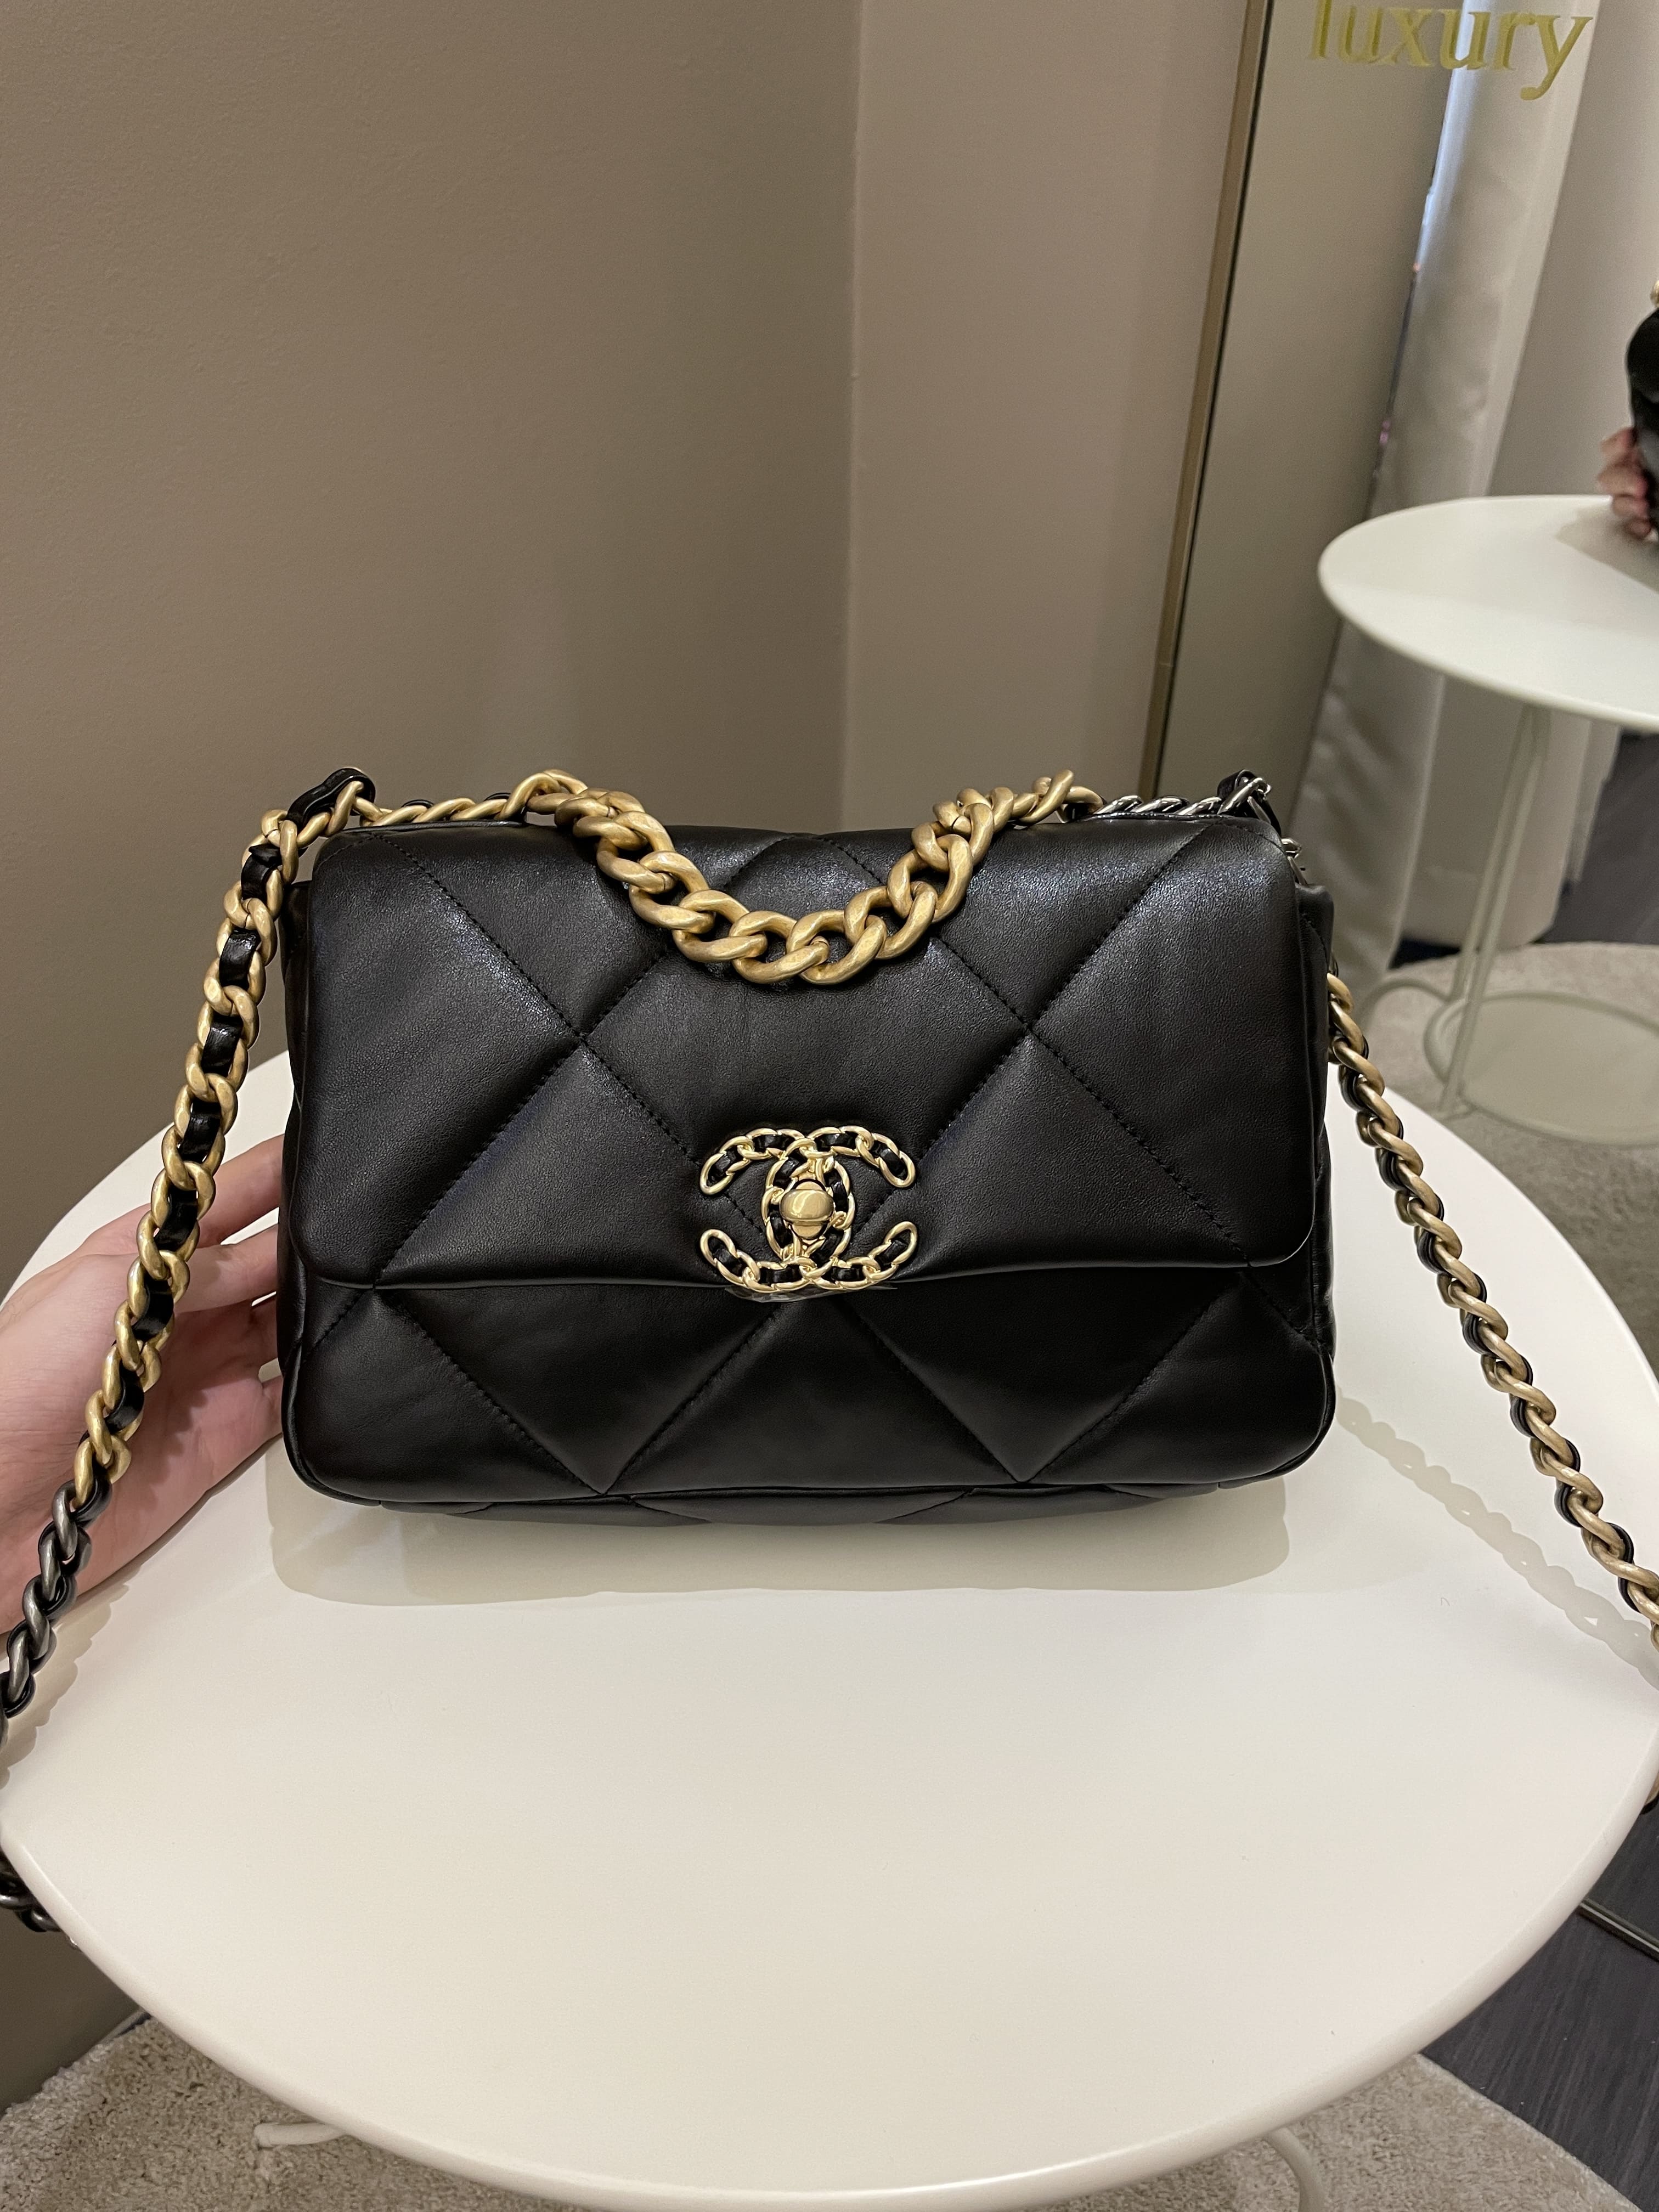 chanel 19 flap bag small